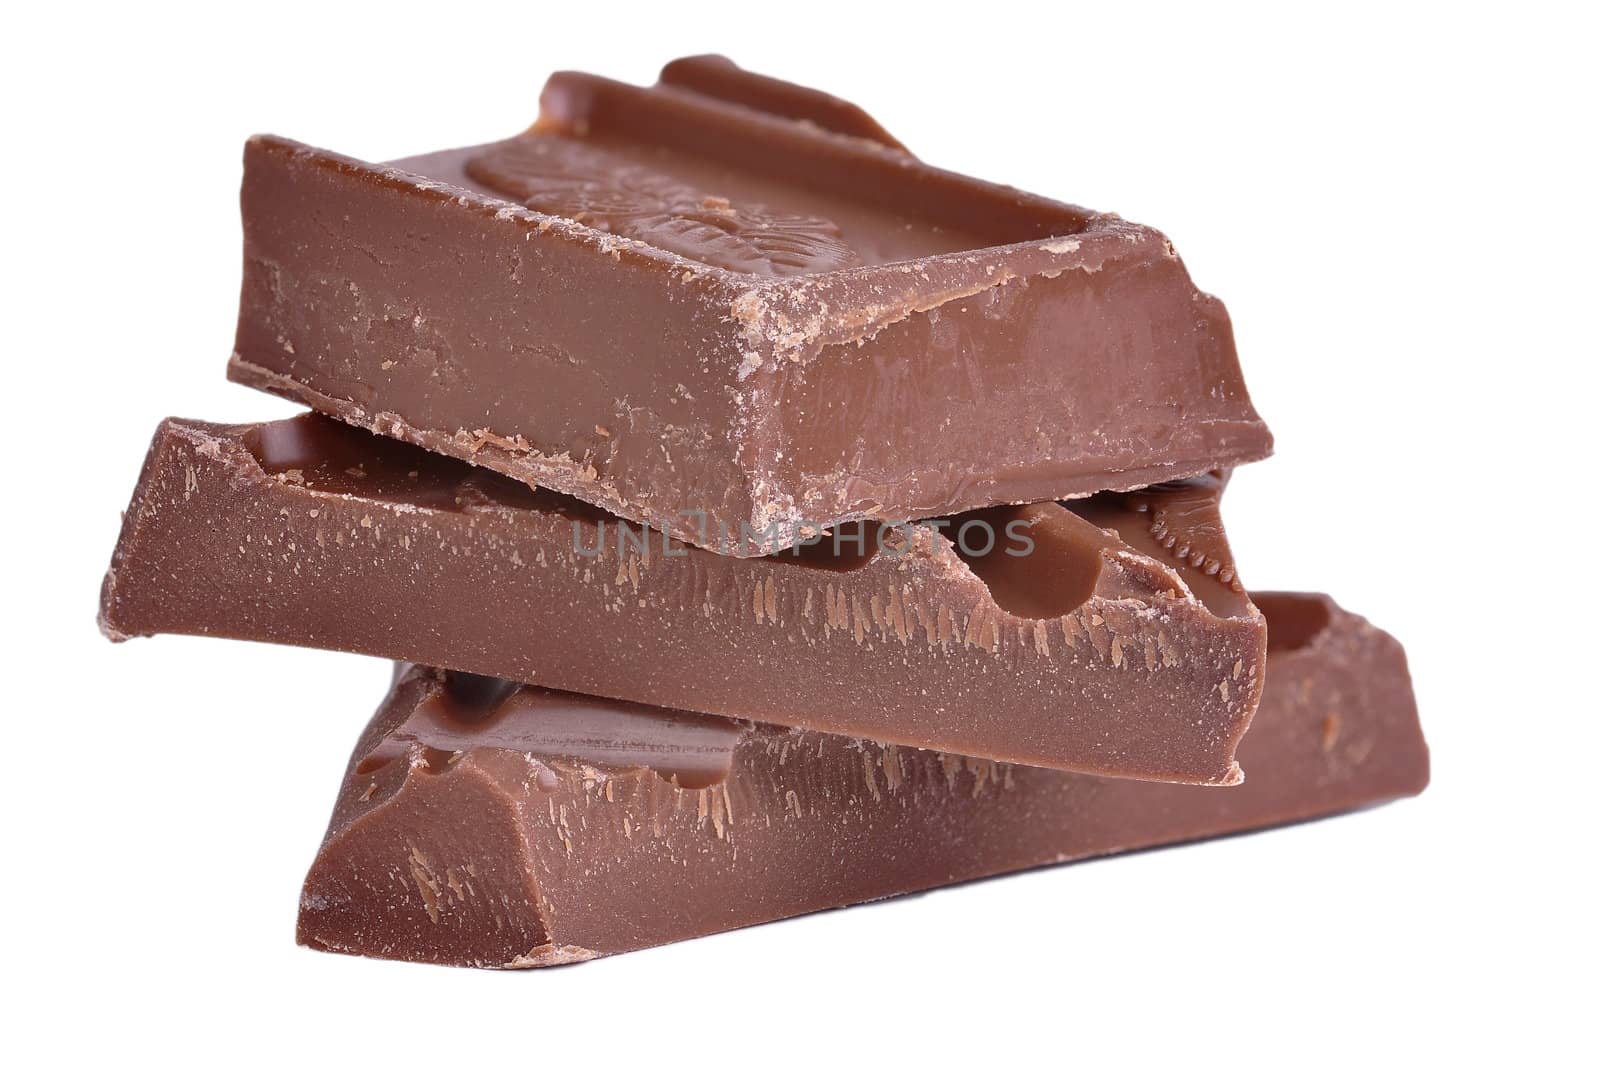 Roughly cut chunks of a chocolate bar isolated in white